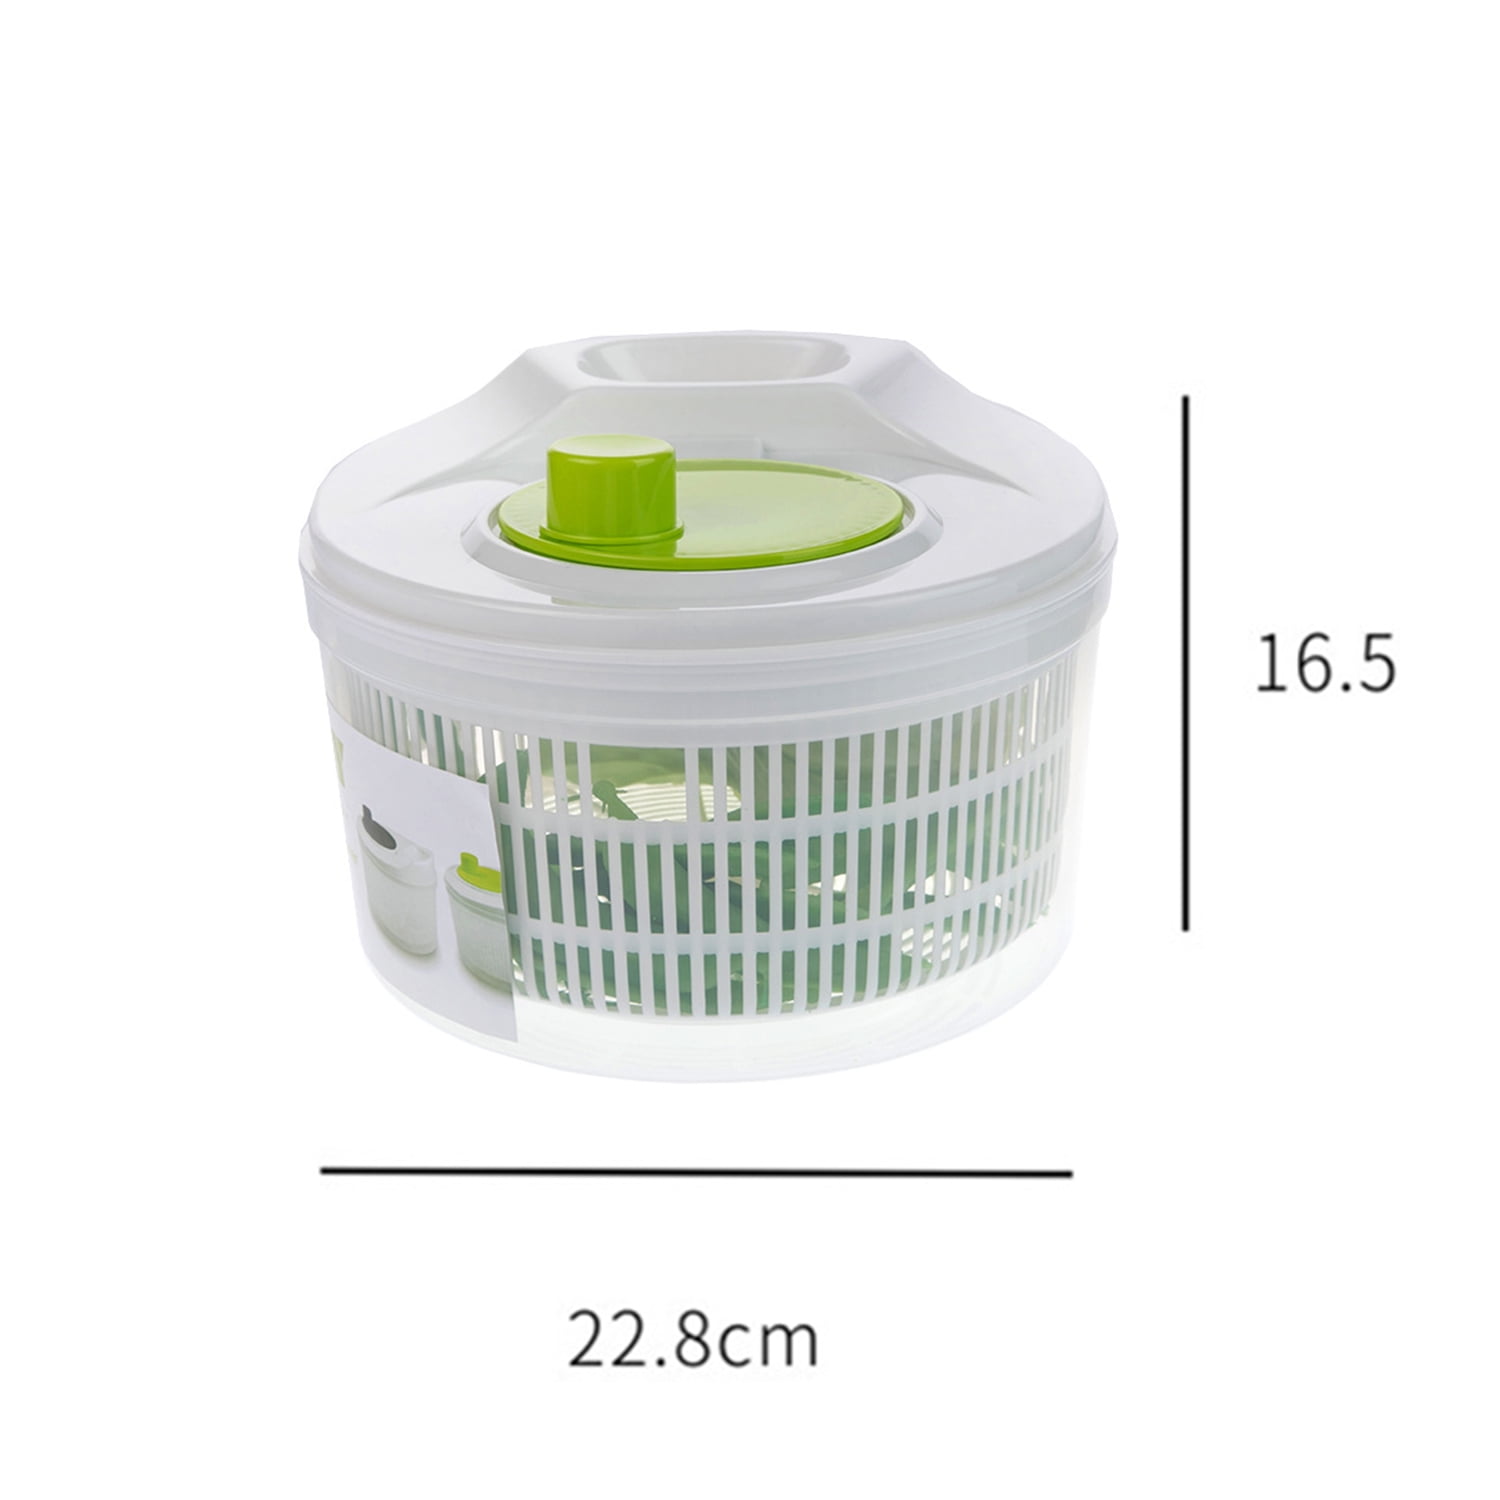 Salad Spinner, Vegetable Washer with Bowl, Anti-Wobble Tech, Lockable Colander Basket and Lid with Pull Cord Swtroom, White